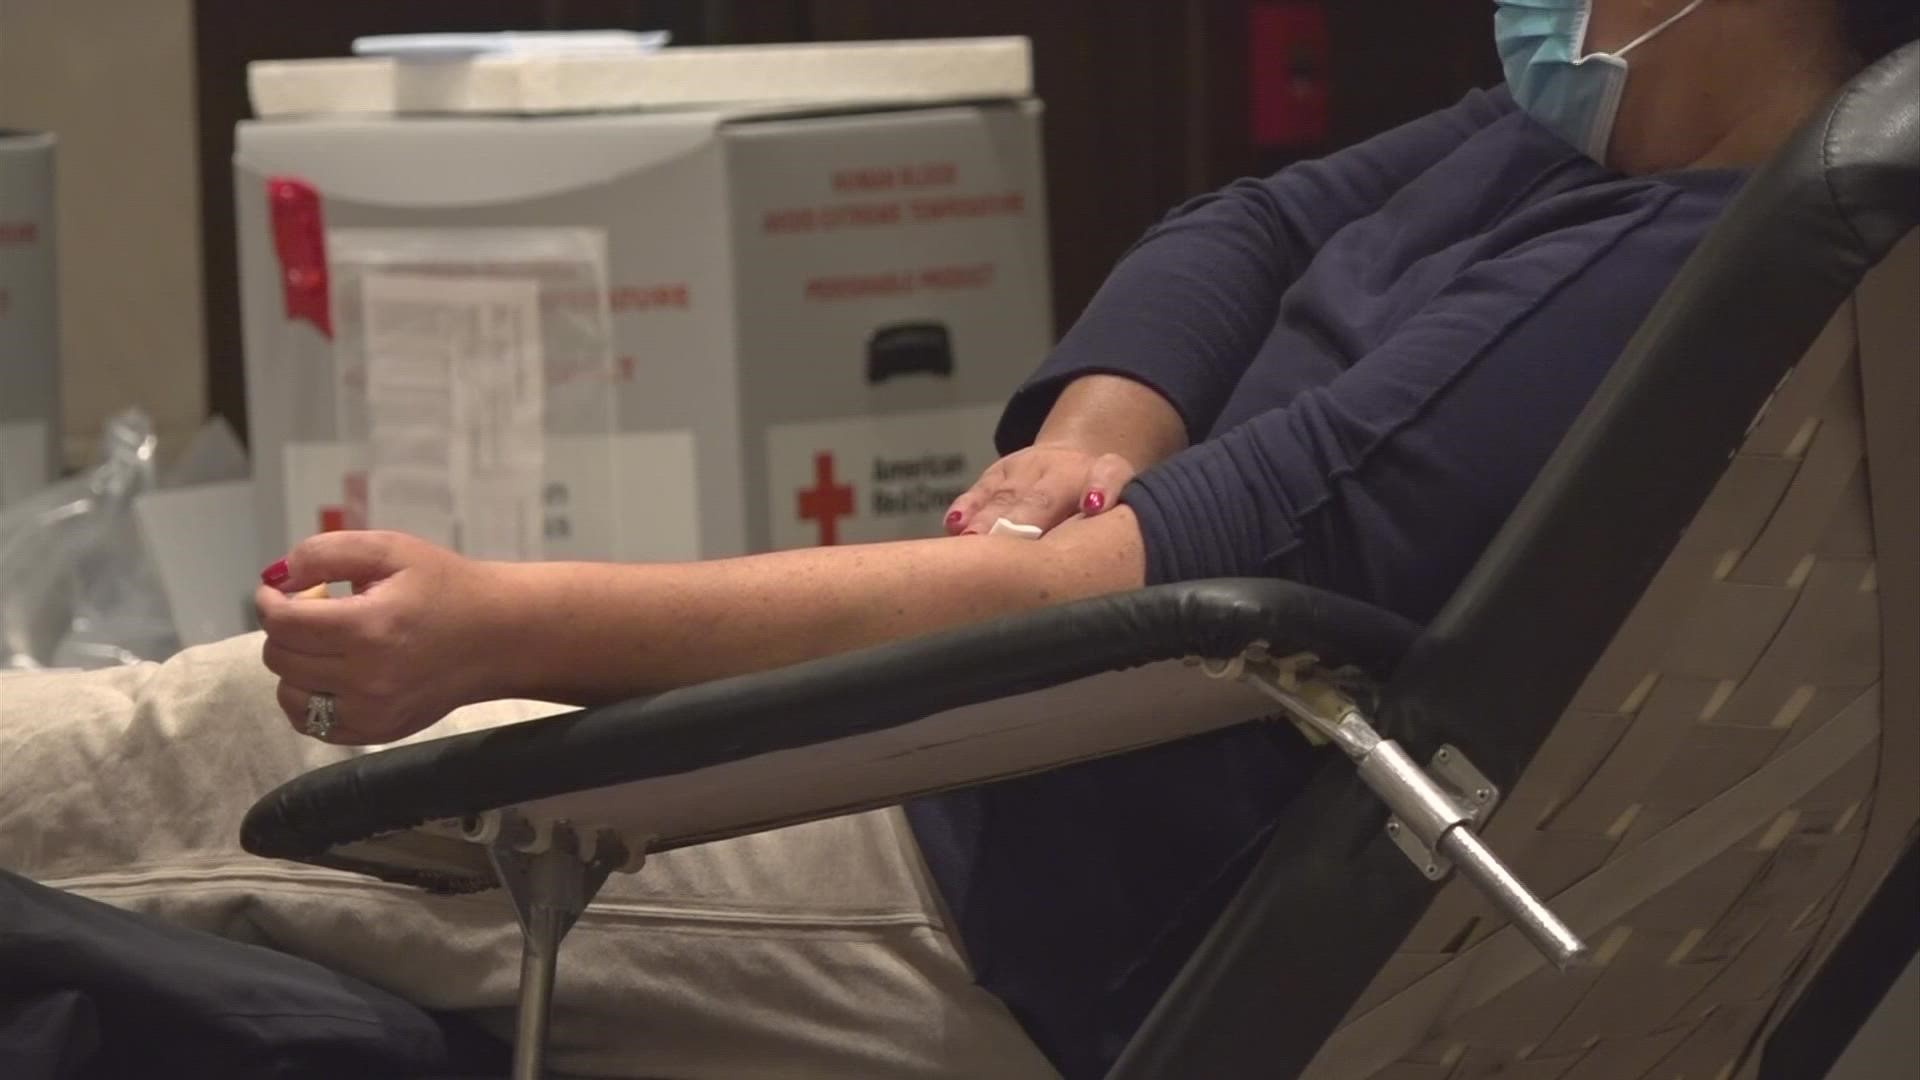 The American Red Cross sent 200 units of blood ahead of tornadoes, but due to the shortage during the pandemic, the organization is critically low on blood.